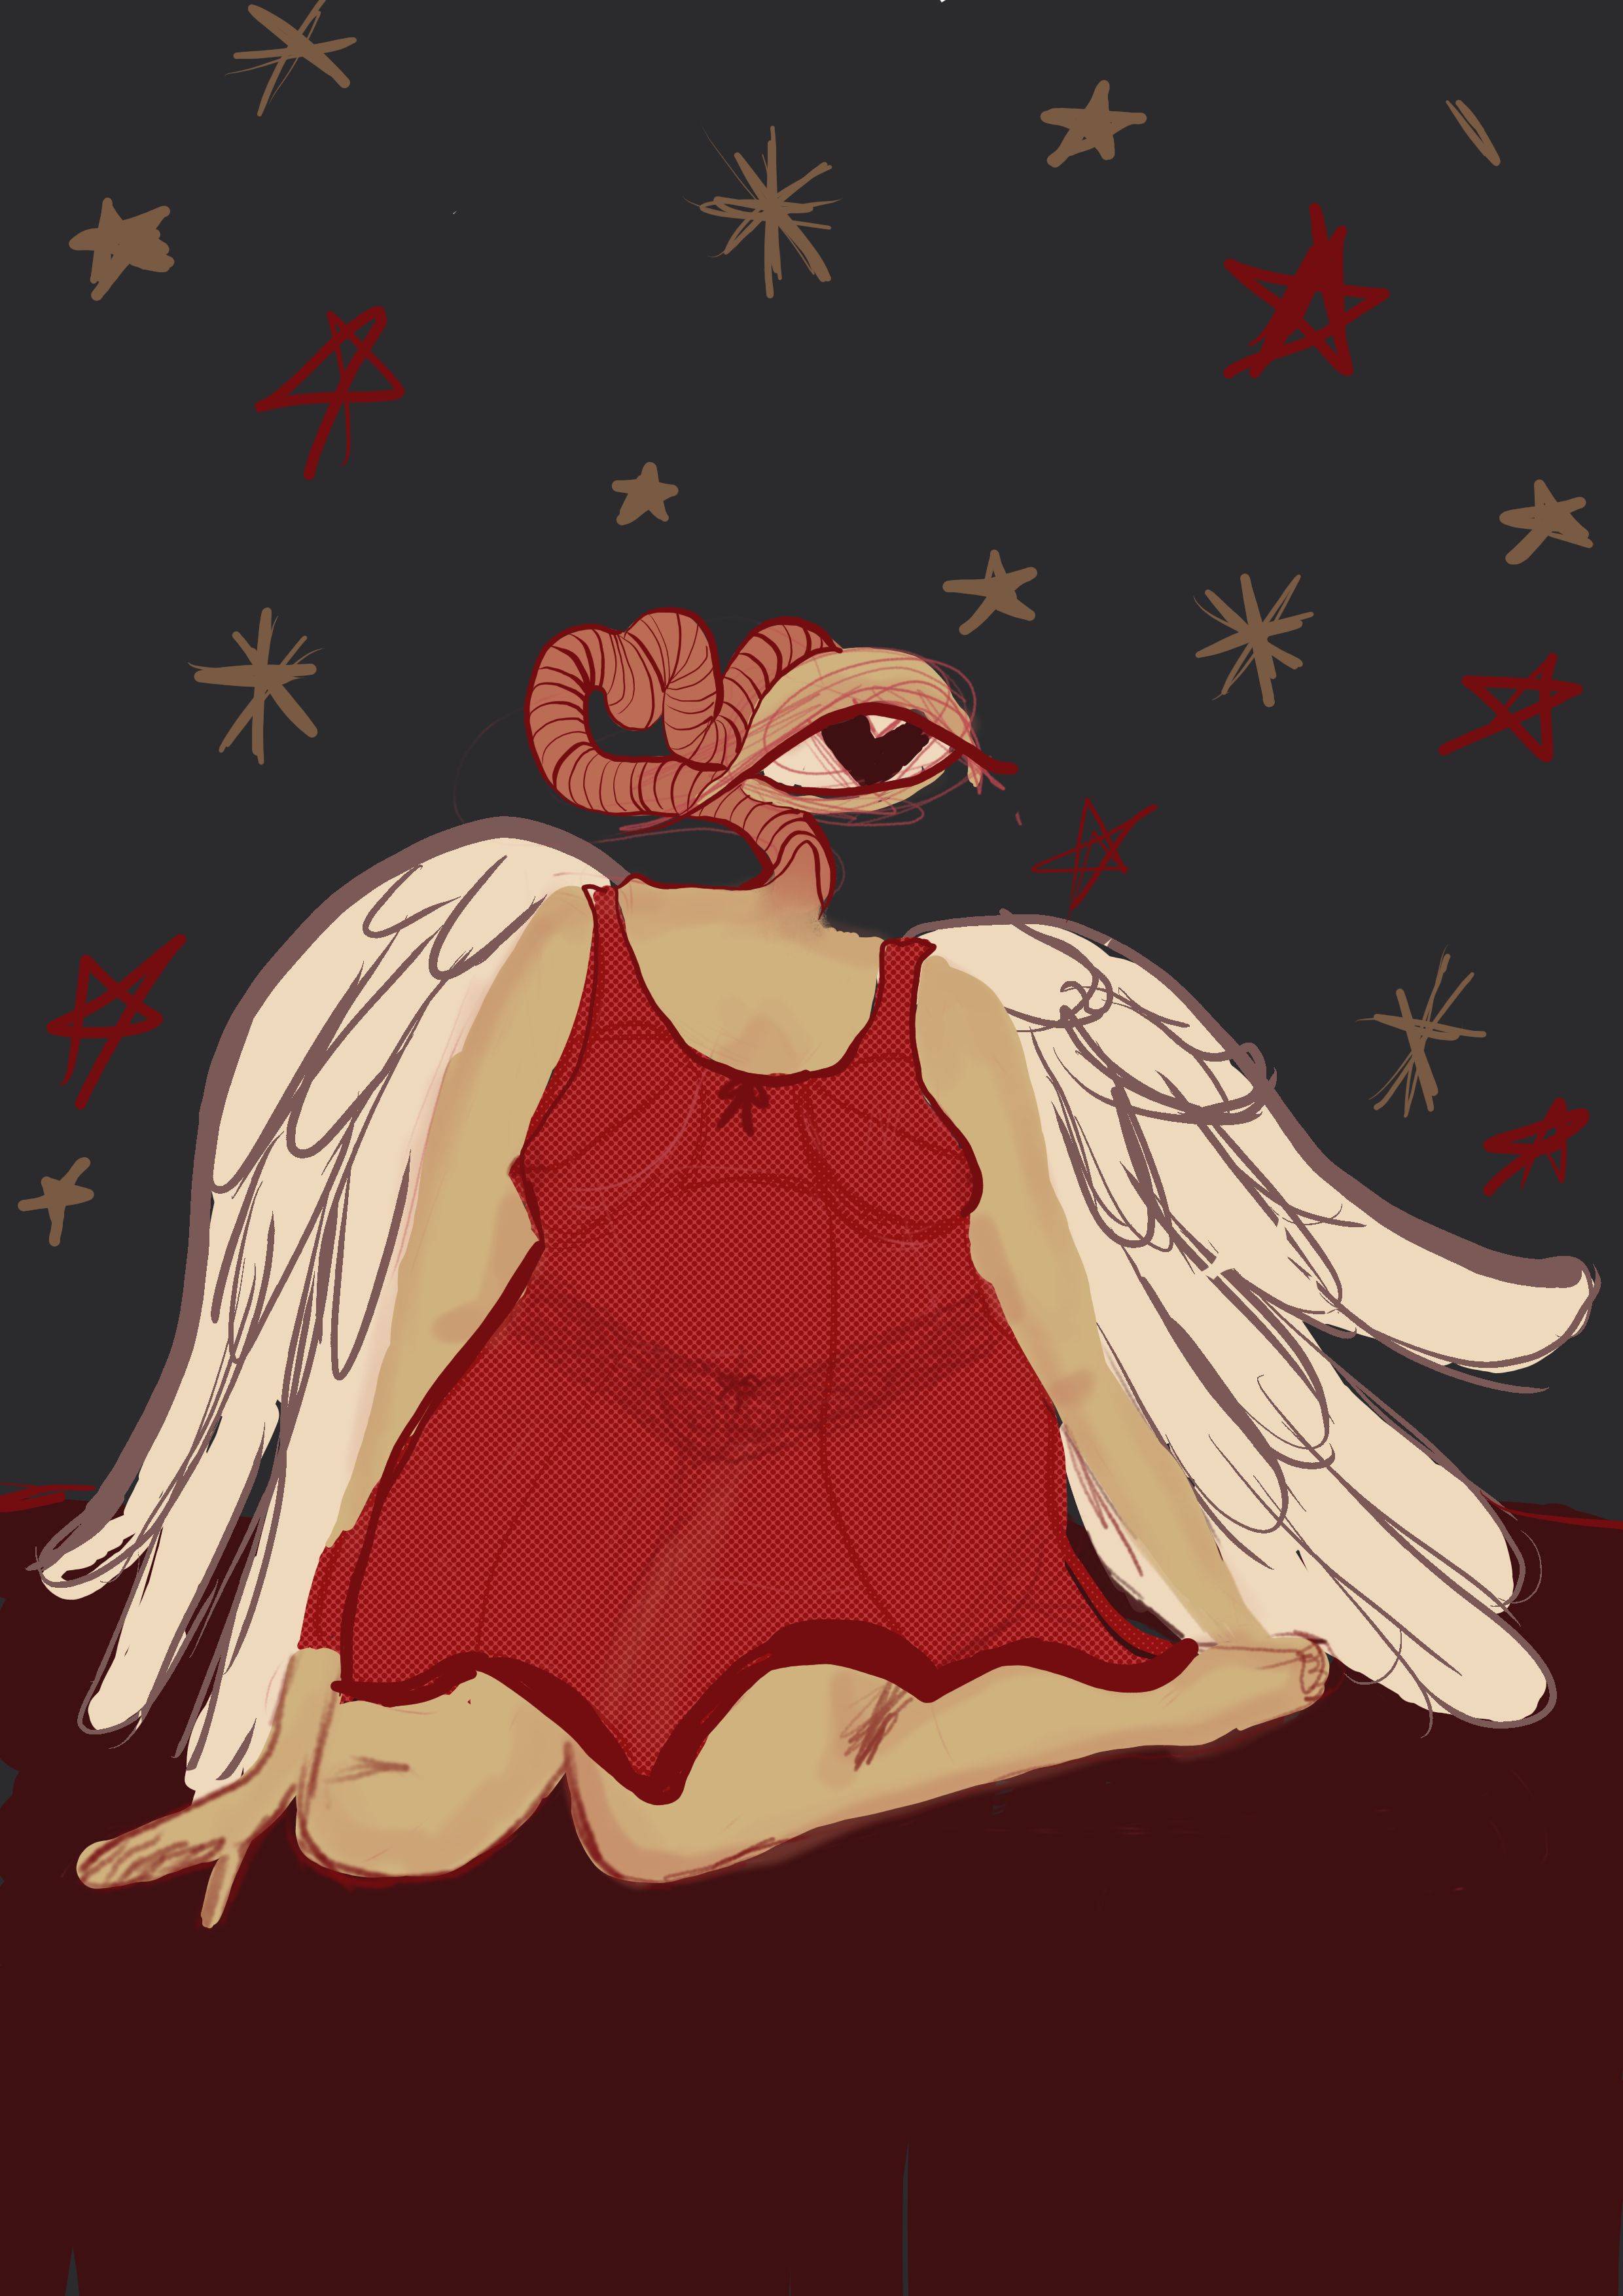 Character in a sheer red slip dress, with very pale angel wings